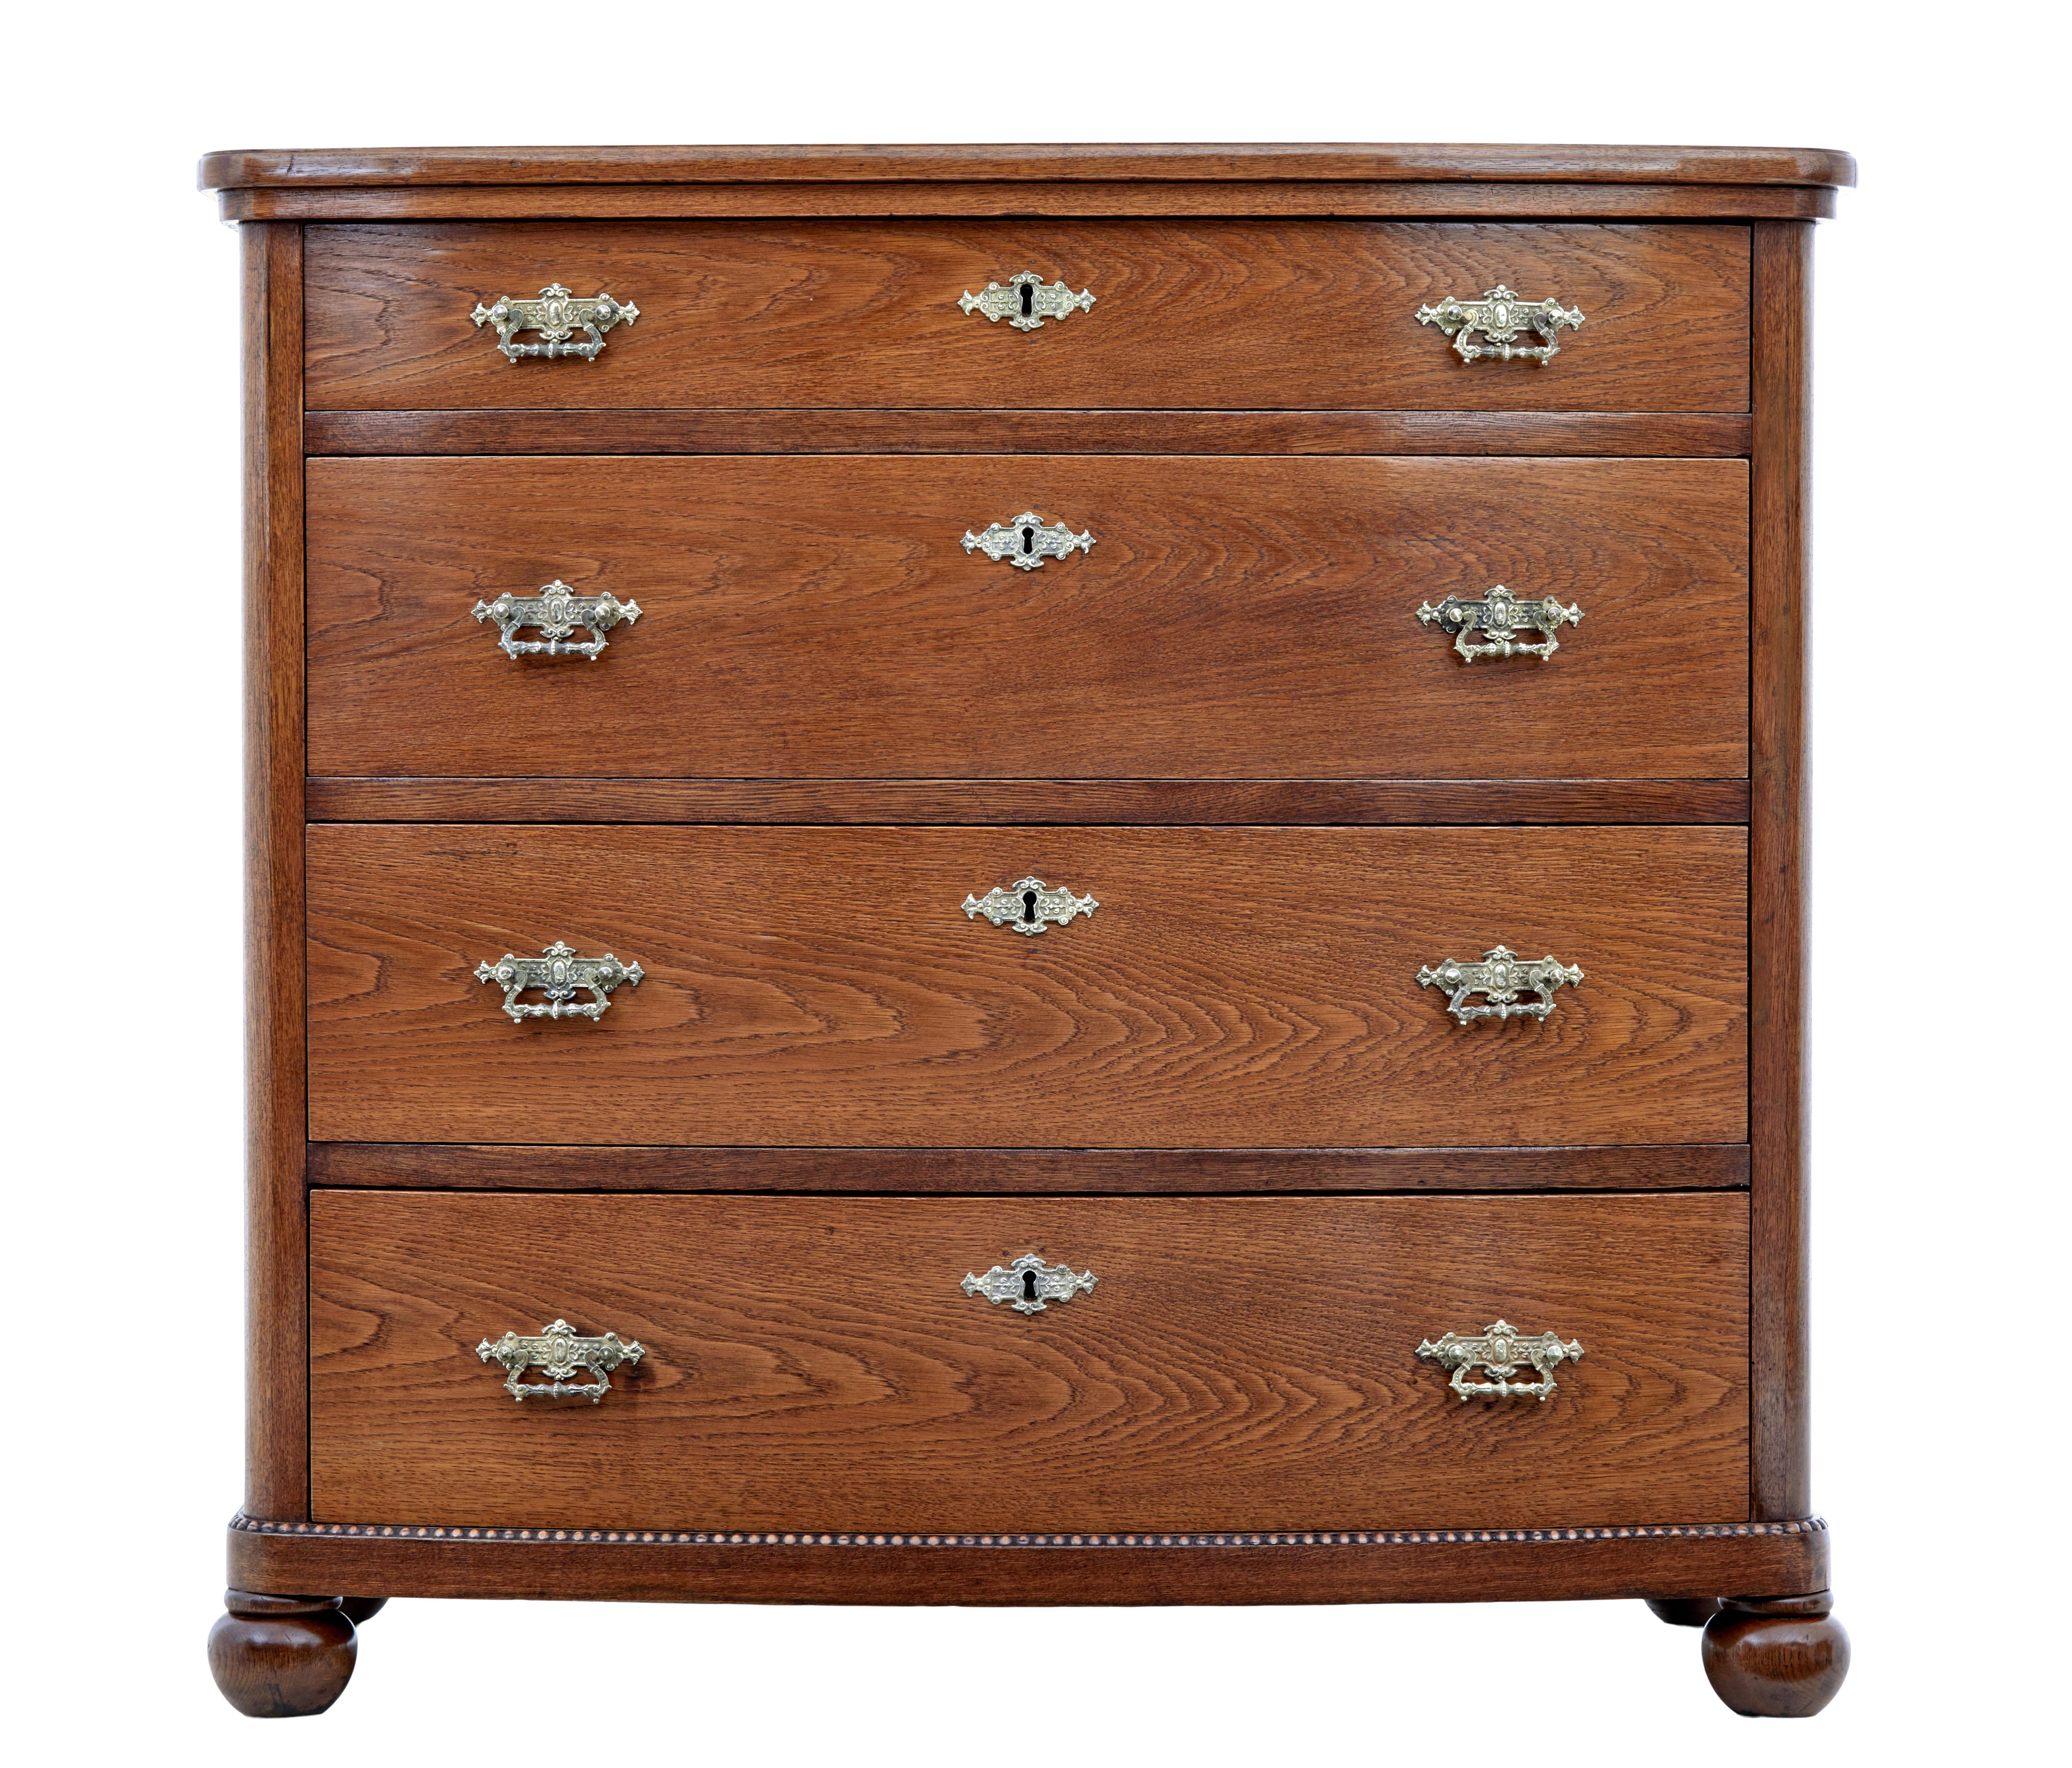 19th century bowfront oak chest of drawers circa 1880.

Fine quality robust chest of drawers made in oak.  Bowfront shaped and fitted with 4 drawers and original ornate brass handles and escutheons.

Plain oak top with moulded edge, below which a